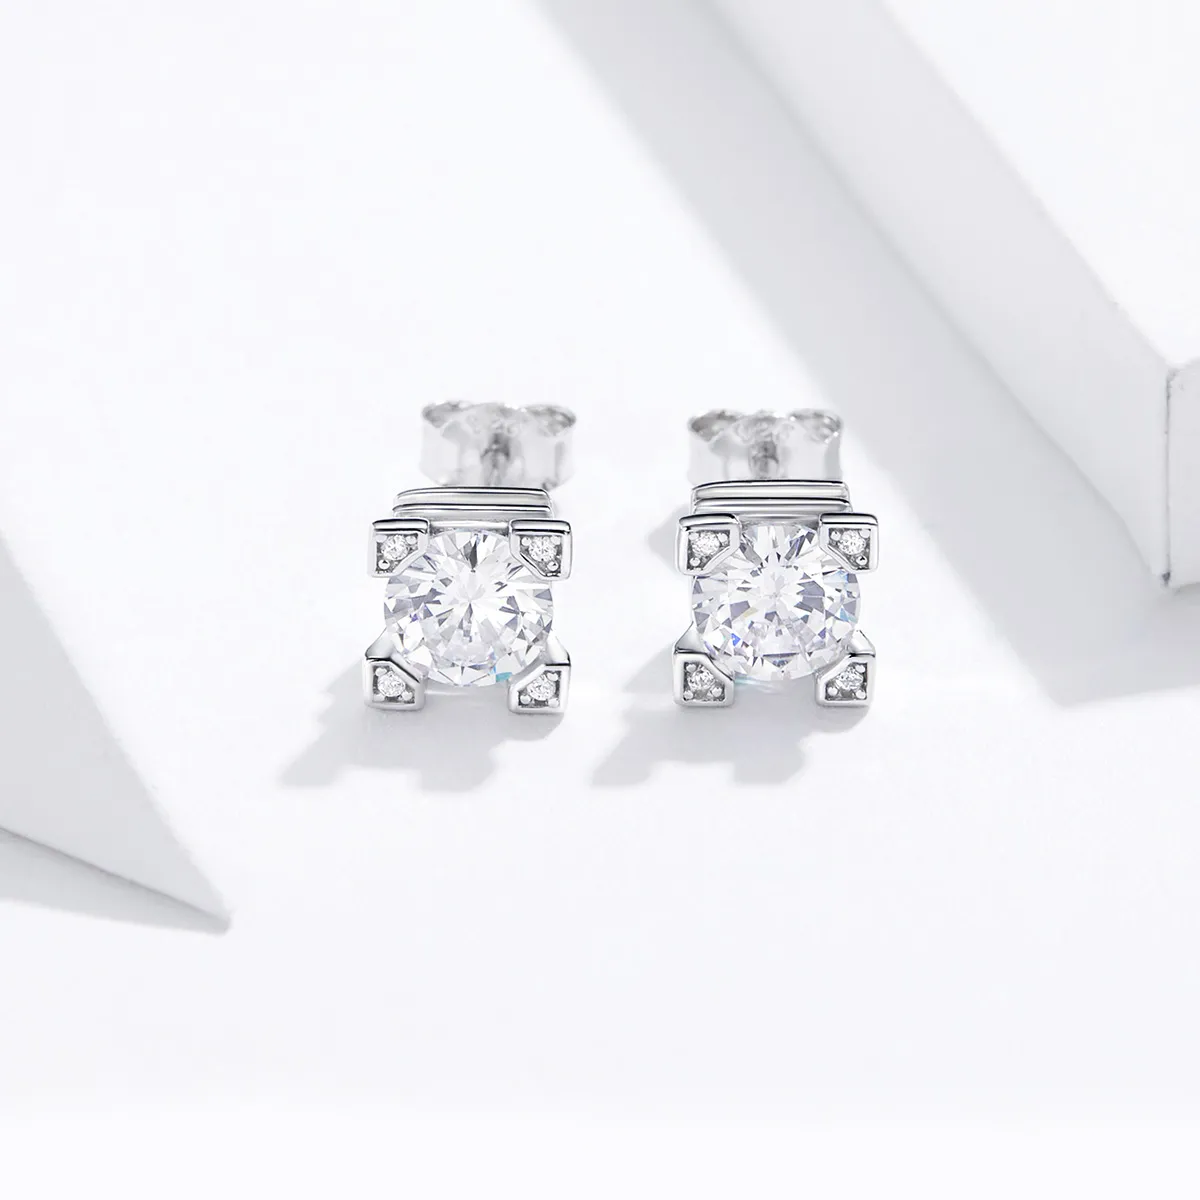 Pandora Style Bright Time Stud Earrings - BSE192